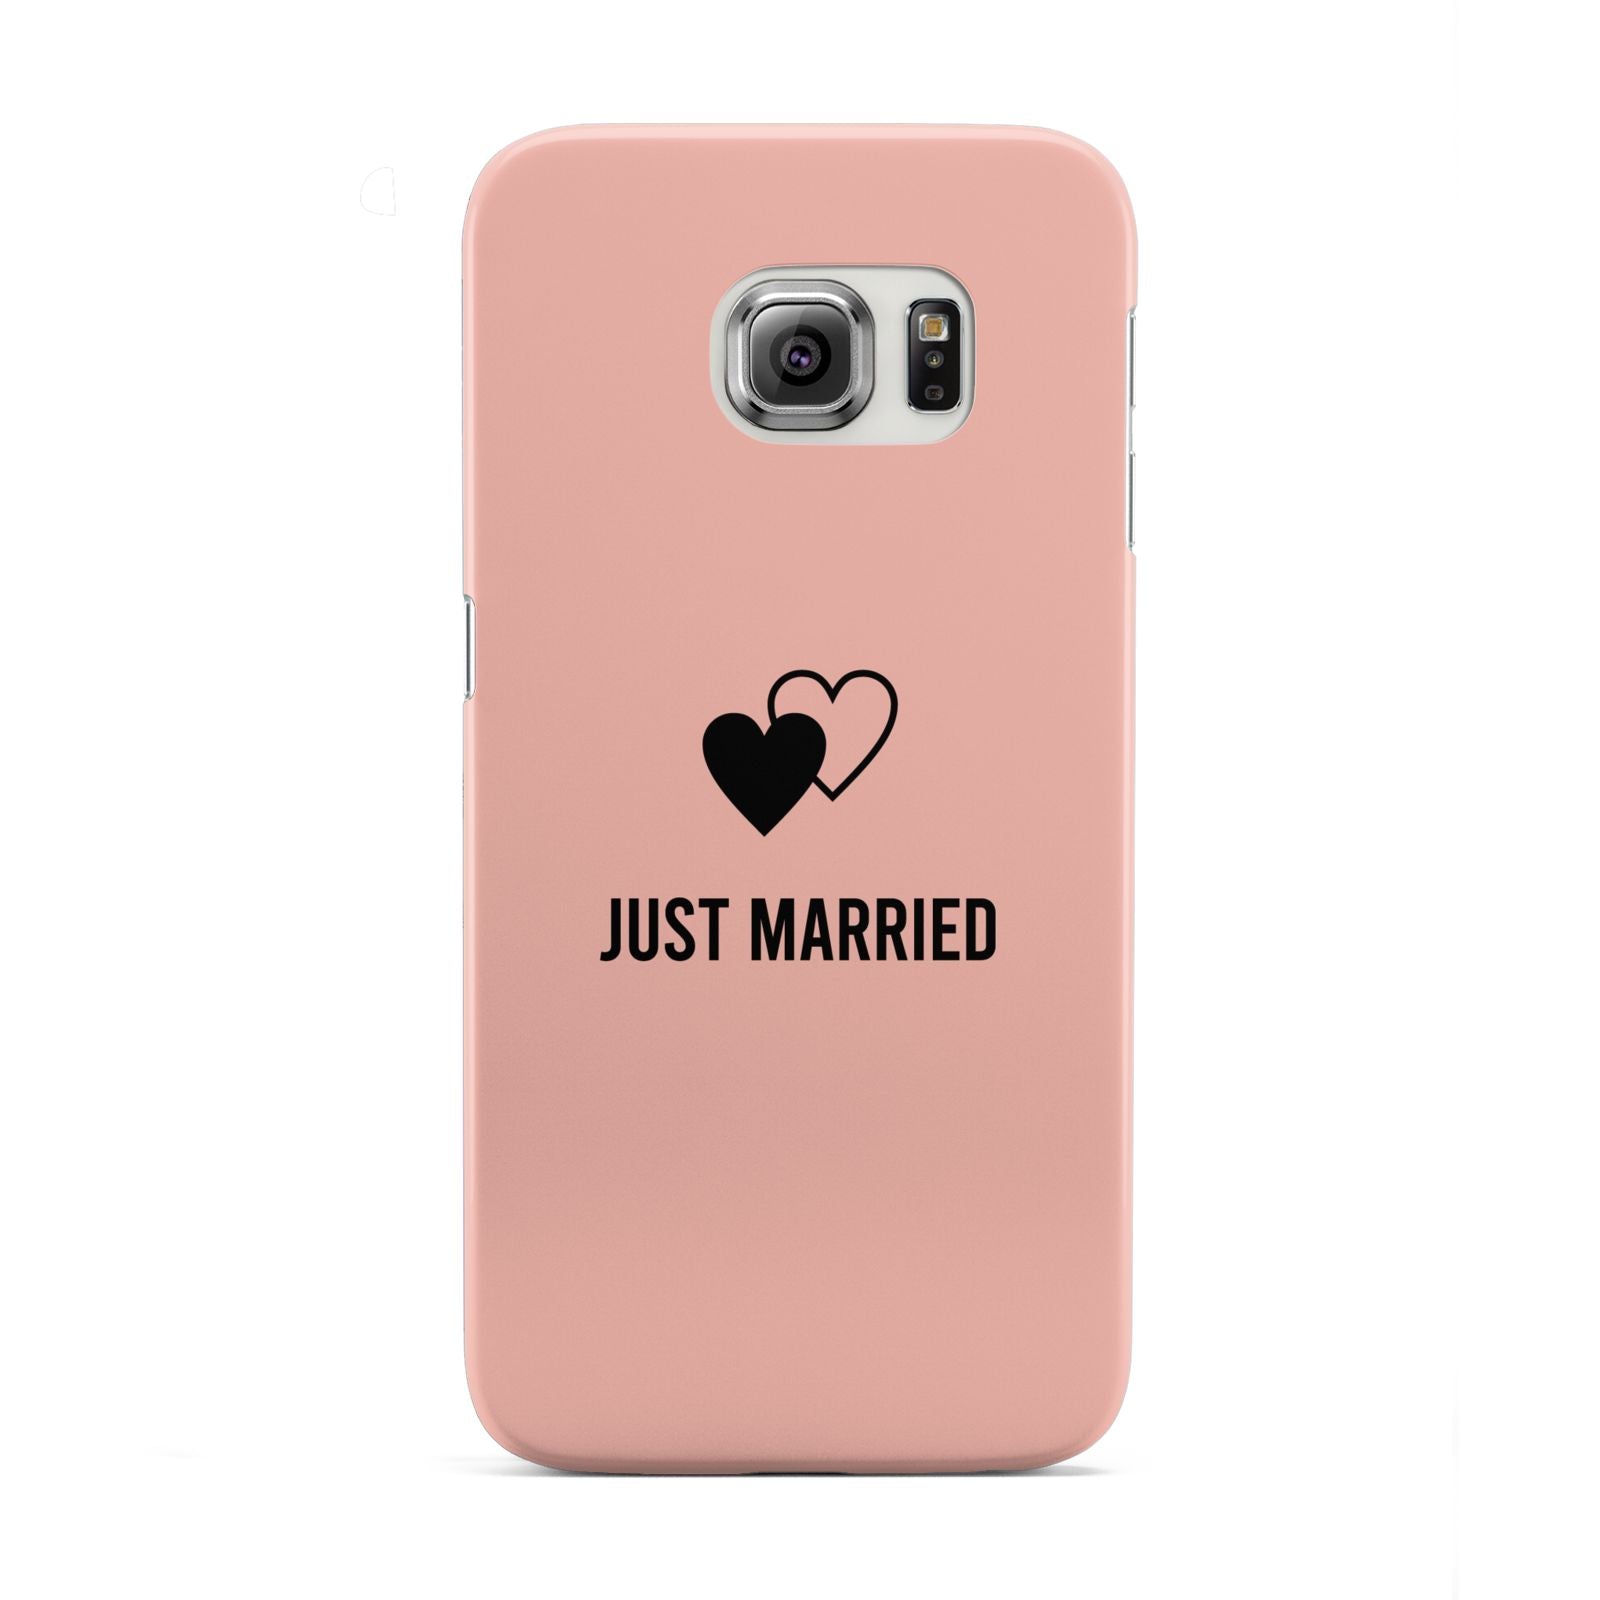 Just Married Samsung Galaxy S6 Edge Case